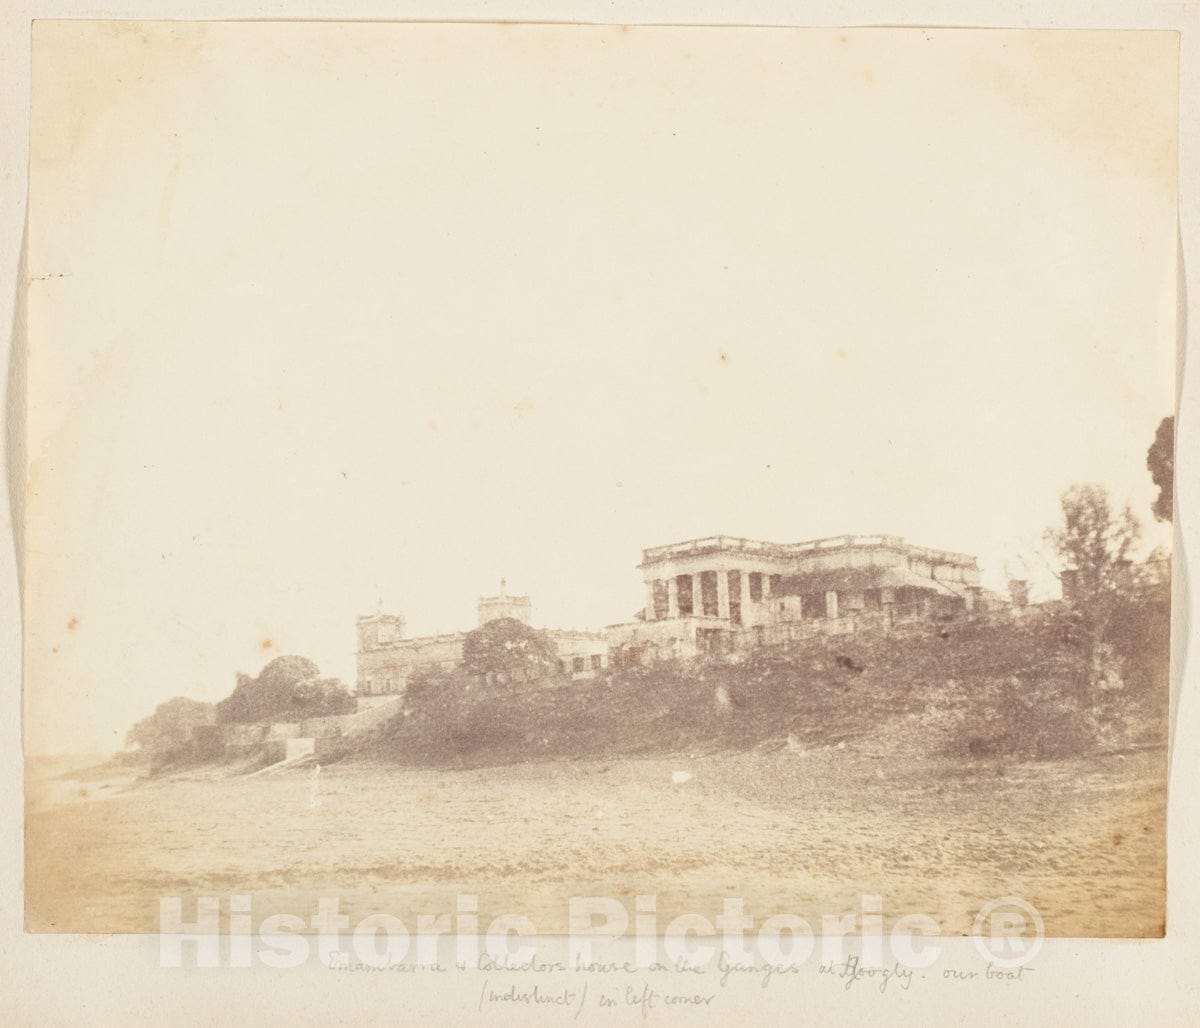 Photo Print : Imambara and Collectors House on The Ganges, Hooghly : Vintage Wall Art